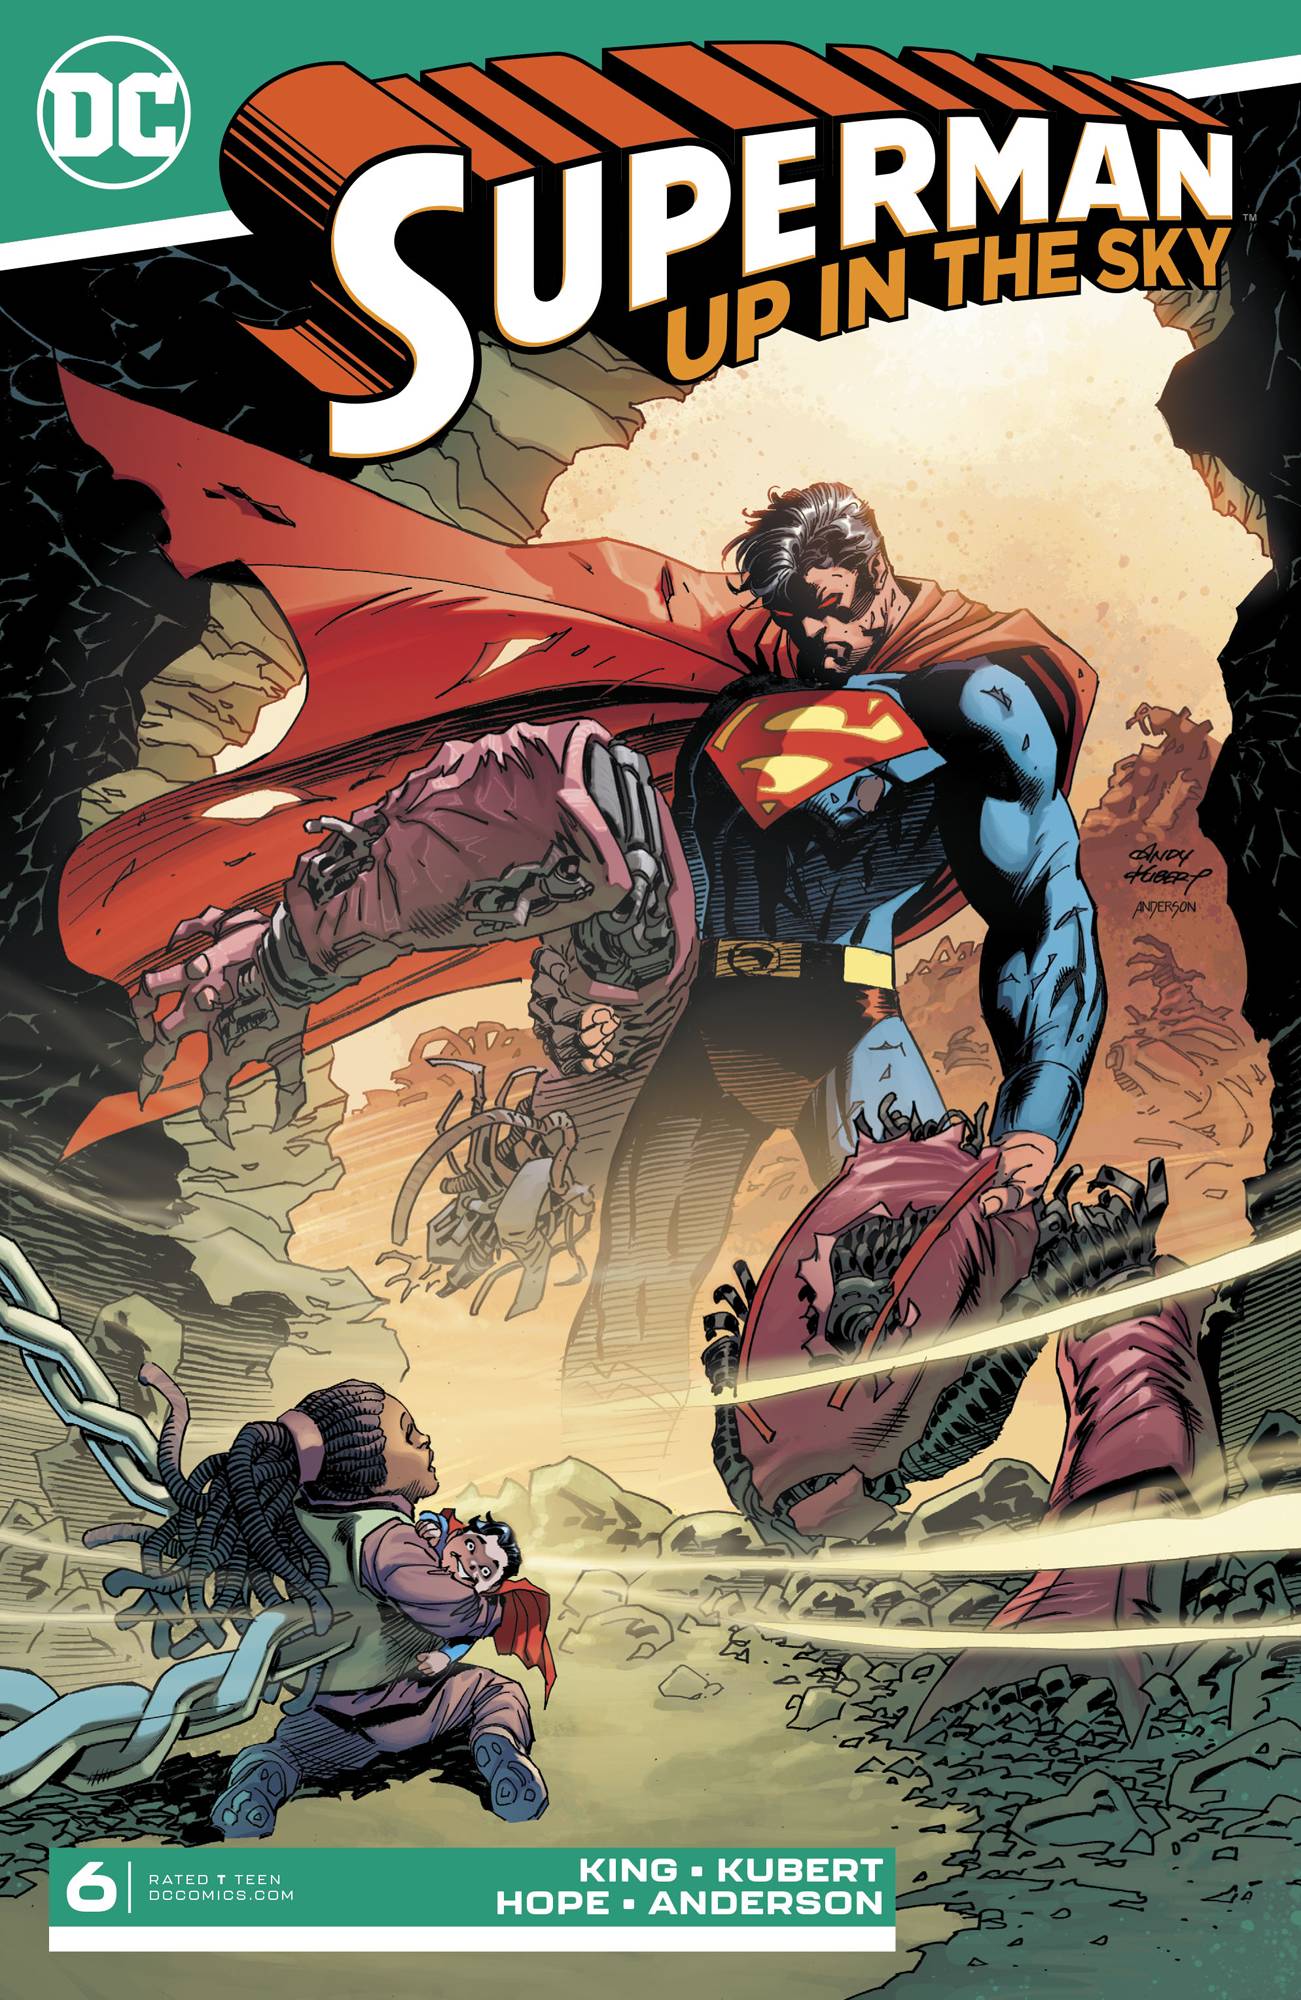 Superman Up In The Sky #6 Of 6 Cover A Kubert 12/4/19 NM